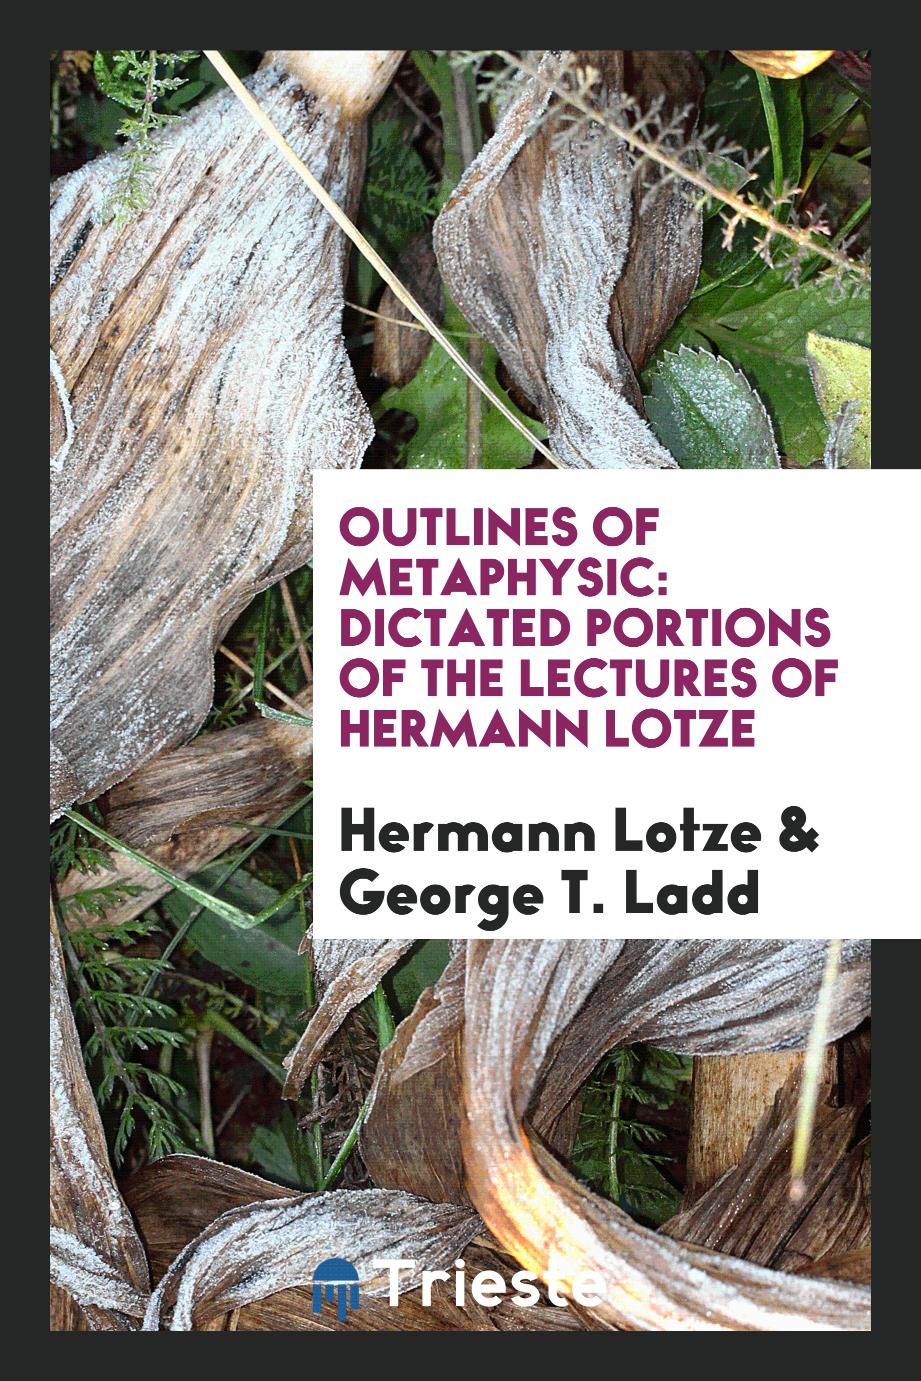 Outlines of metaphysic: dictated portions of the lectures of Hermann Lotze